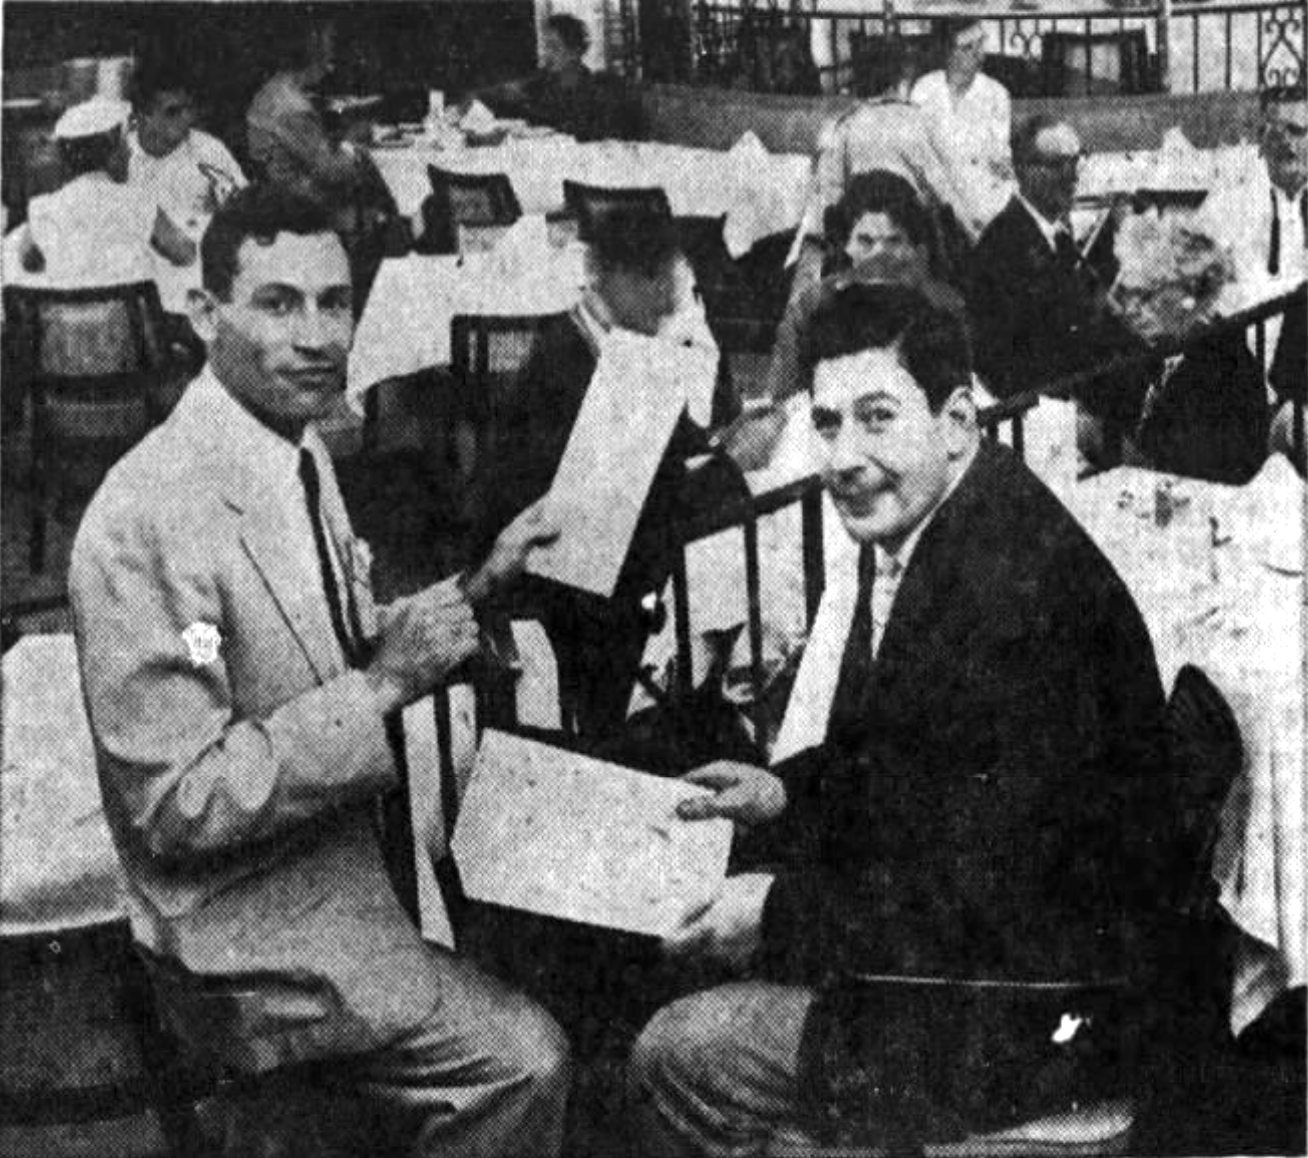 Two men sit at a restaurant table. One man is holding a menu. 